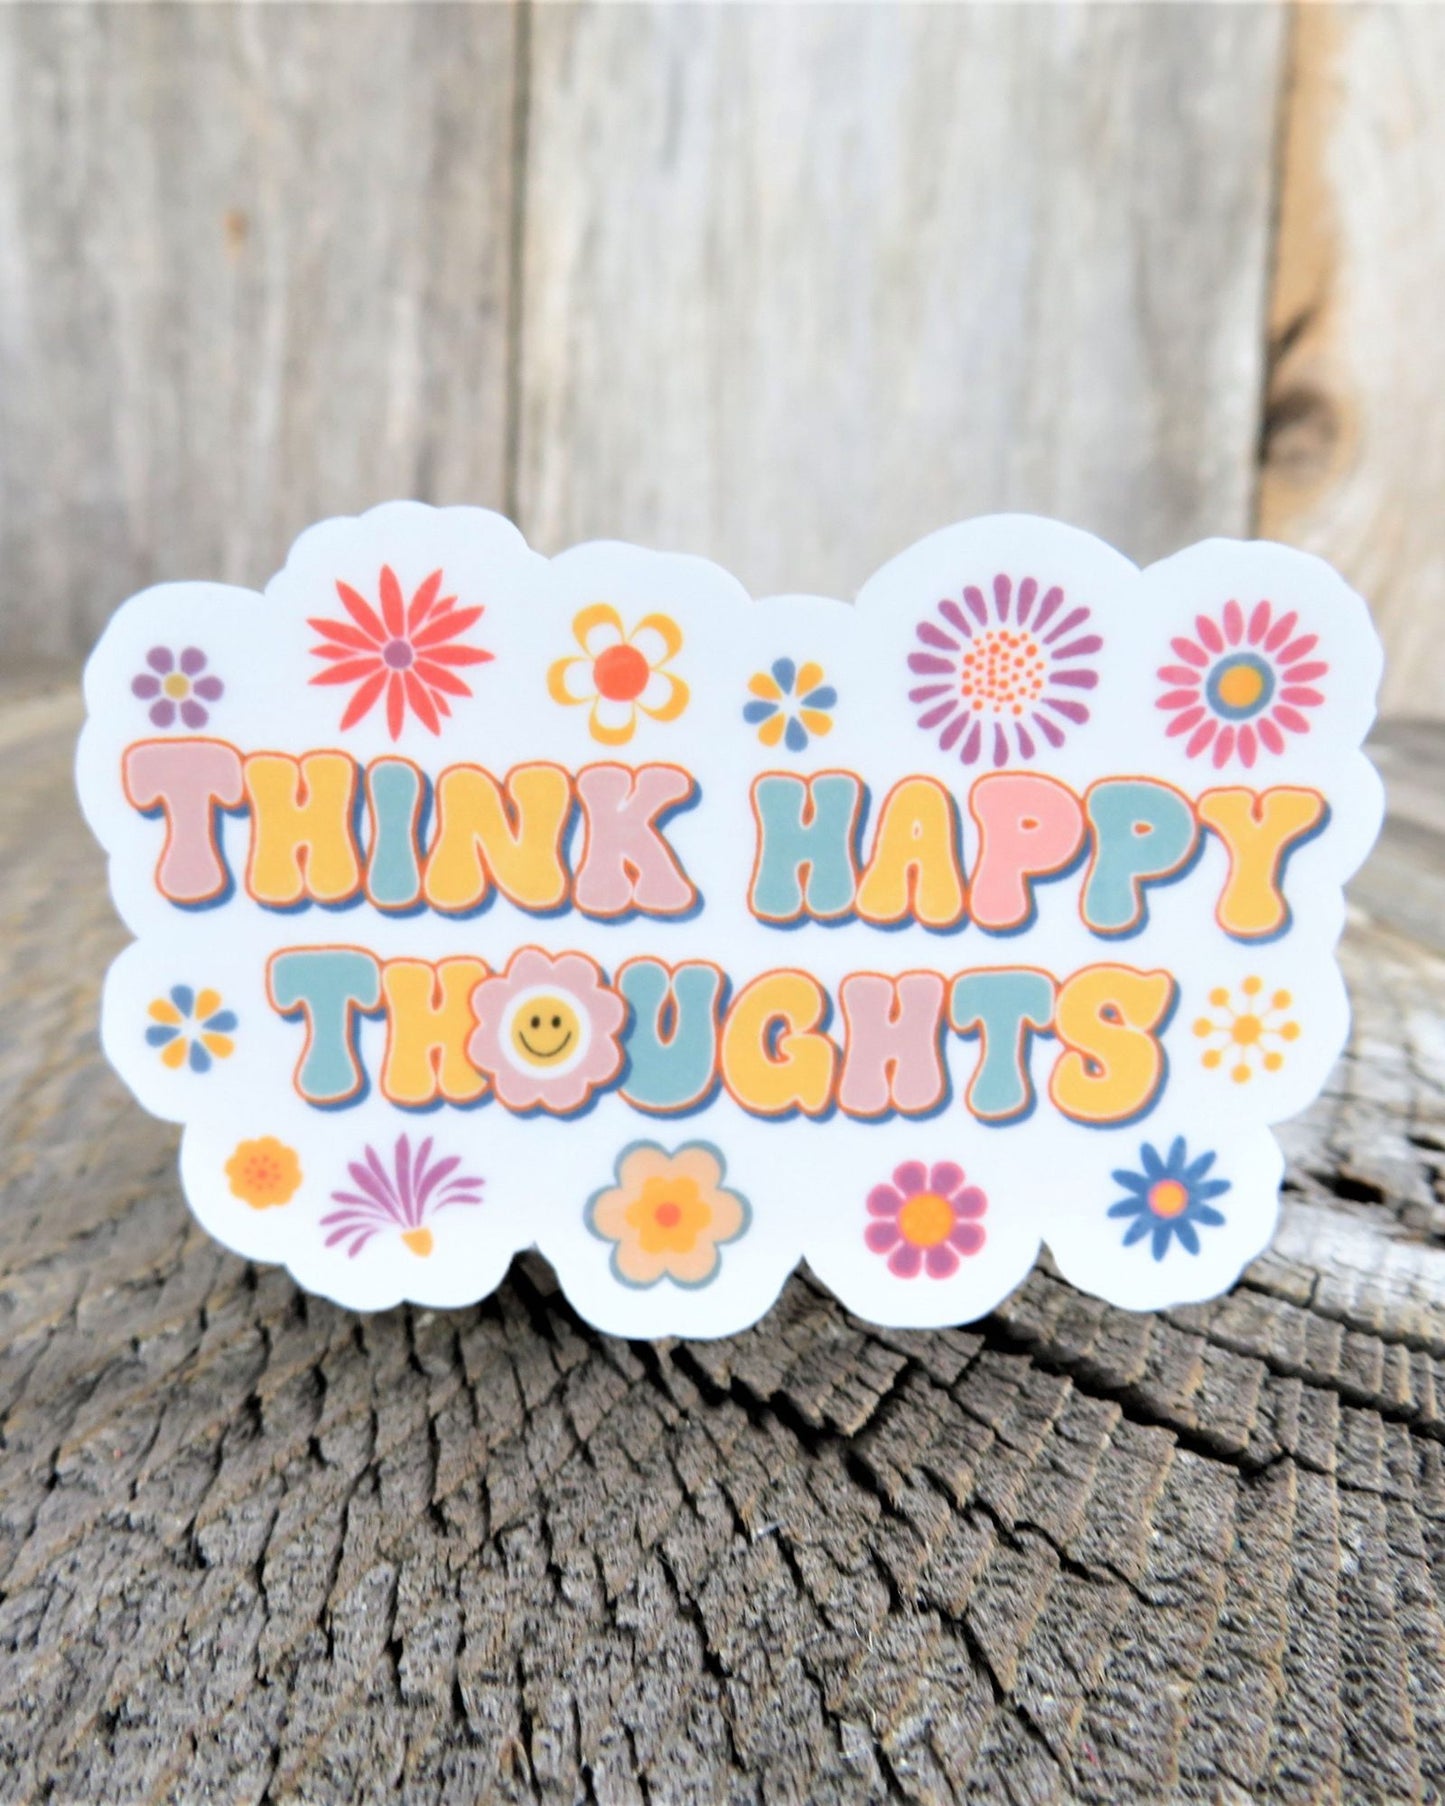 Think Happy Thoughts Sticker Flower Power 70s Style Decal Full Color Waterproof Hippie Car Water Bottle Laptop